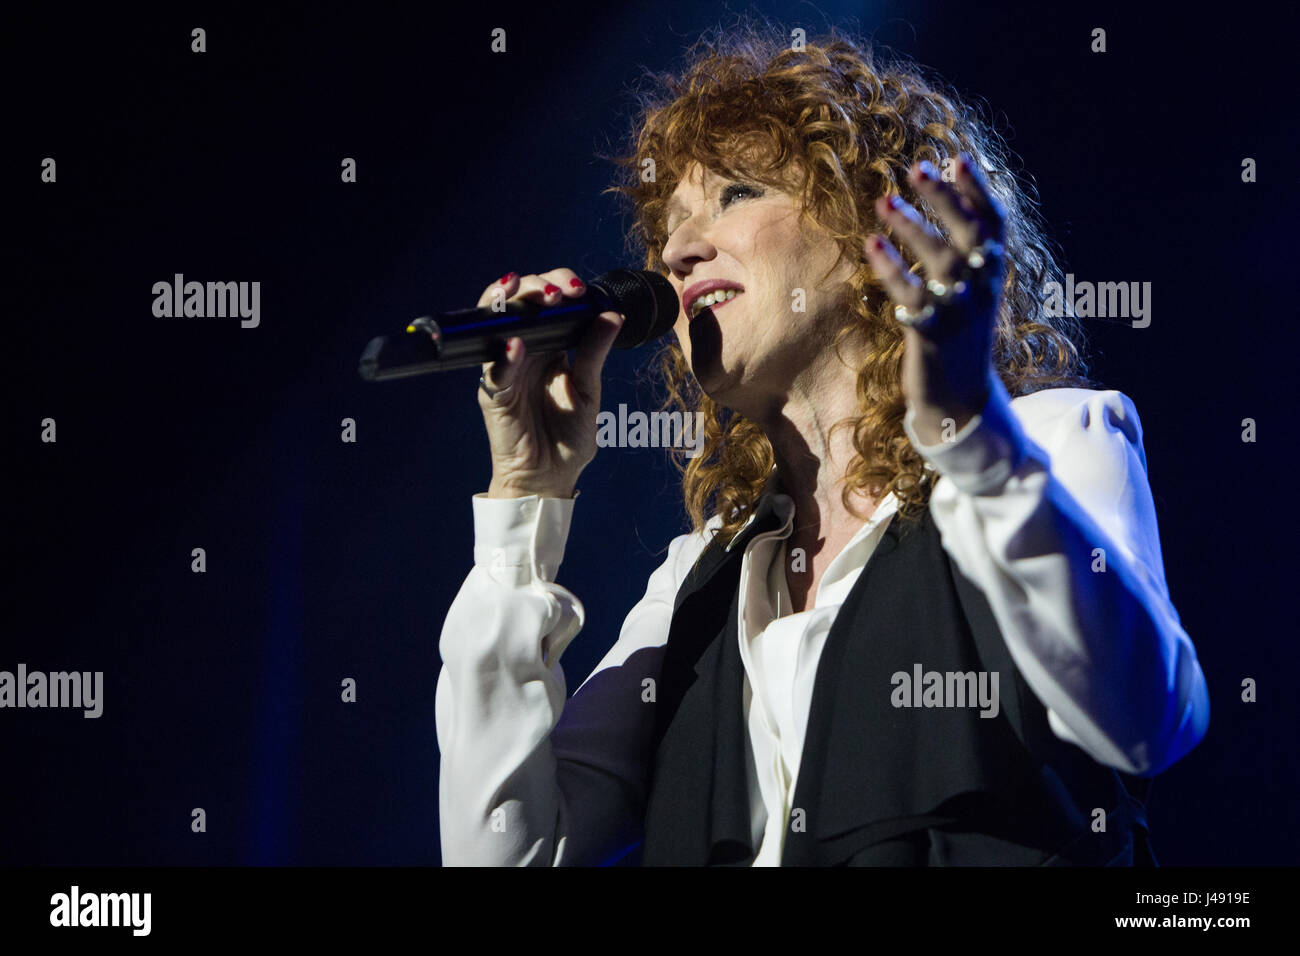 Varese Italy. 09 May 2017. The Italian singer-songwriter FIORELLA MANNOIA perform live on stage at Teatro di Varese during the 'Combattente Tour 2017' Credit: Rodolfo Sassano/Alamy Live News Stock Photo